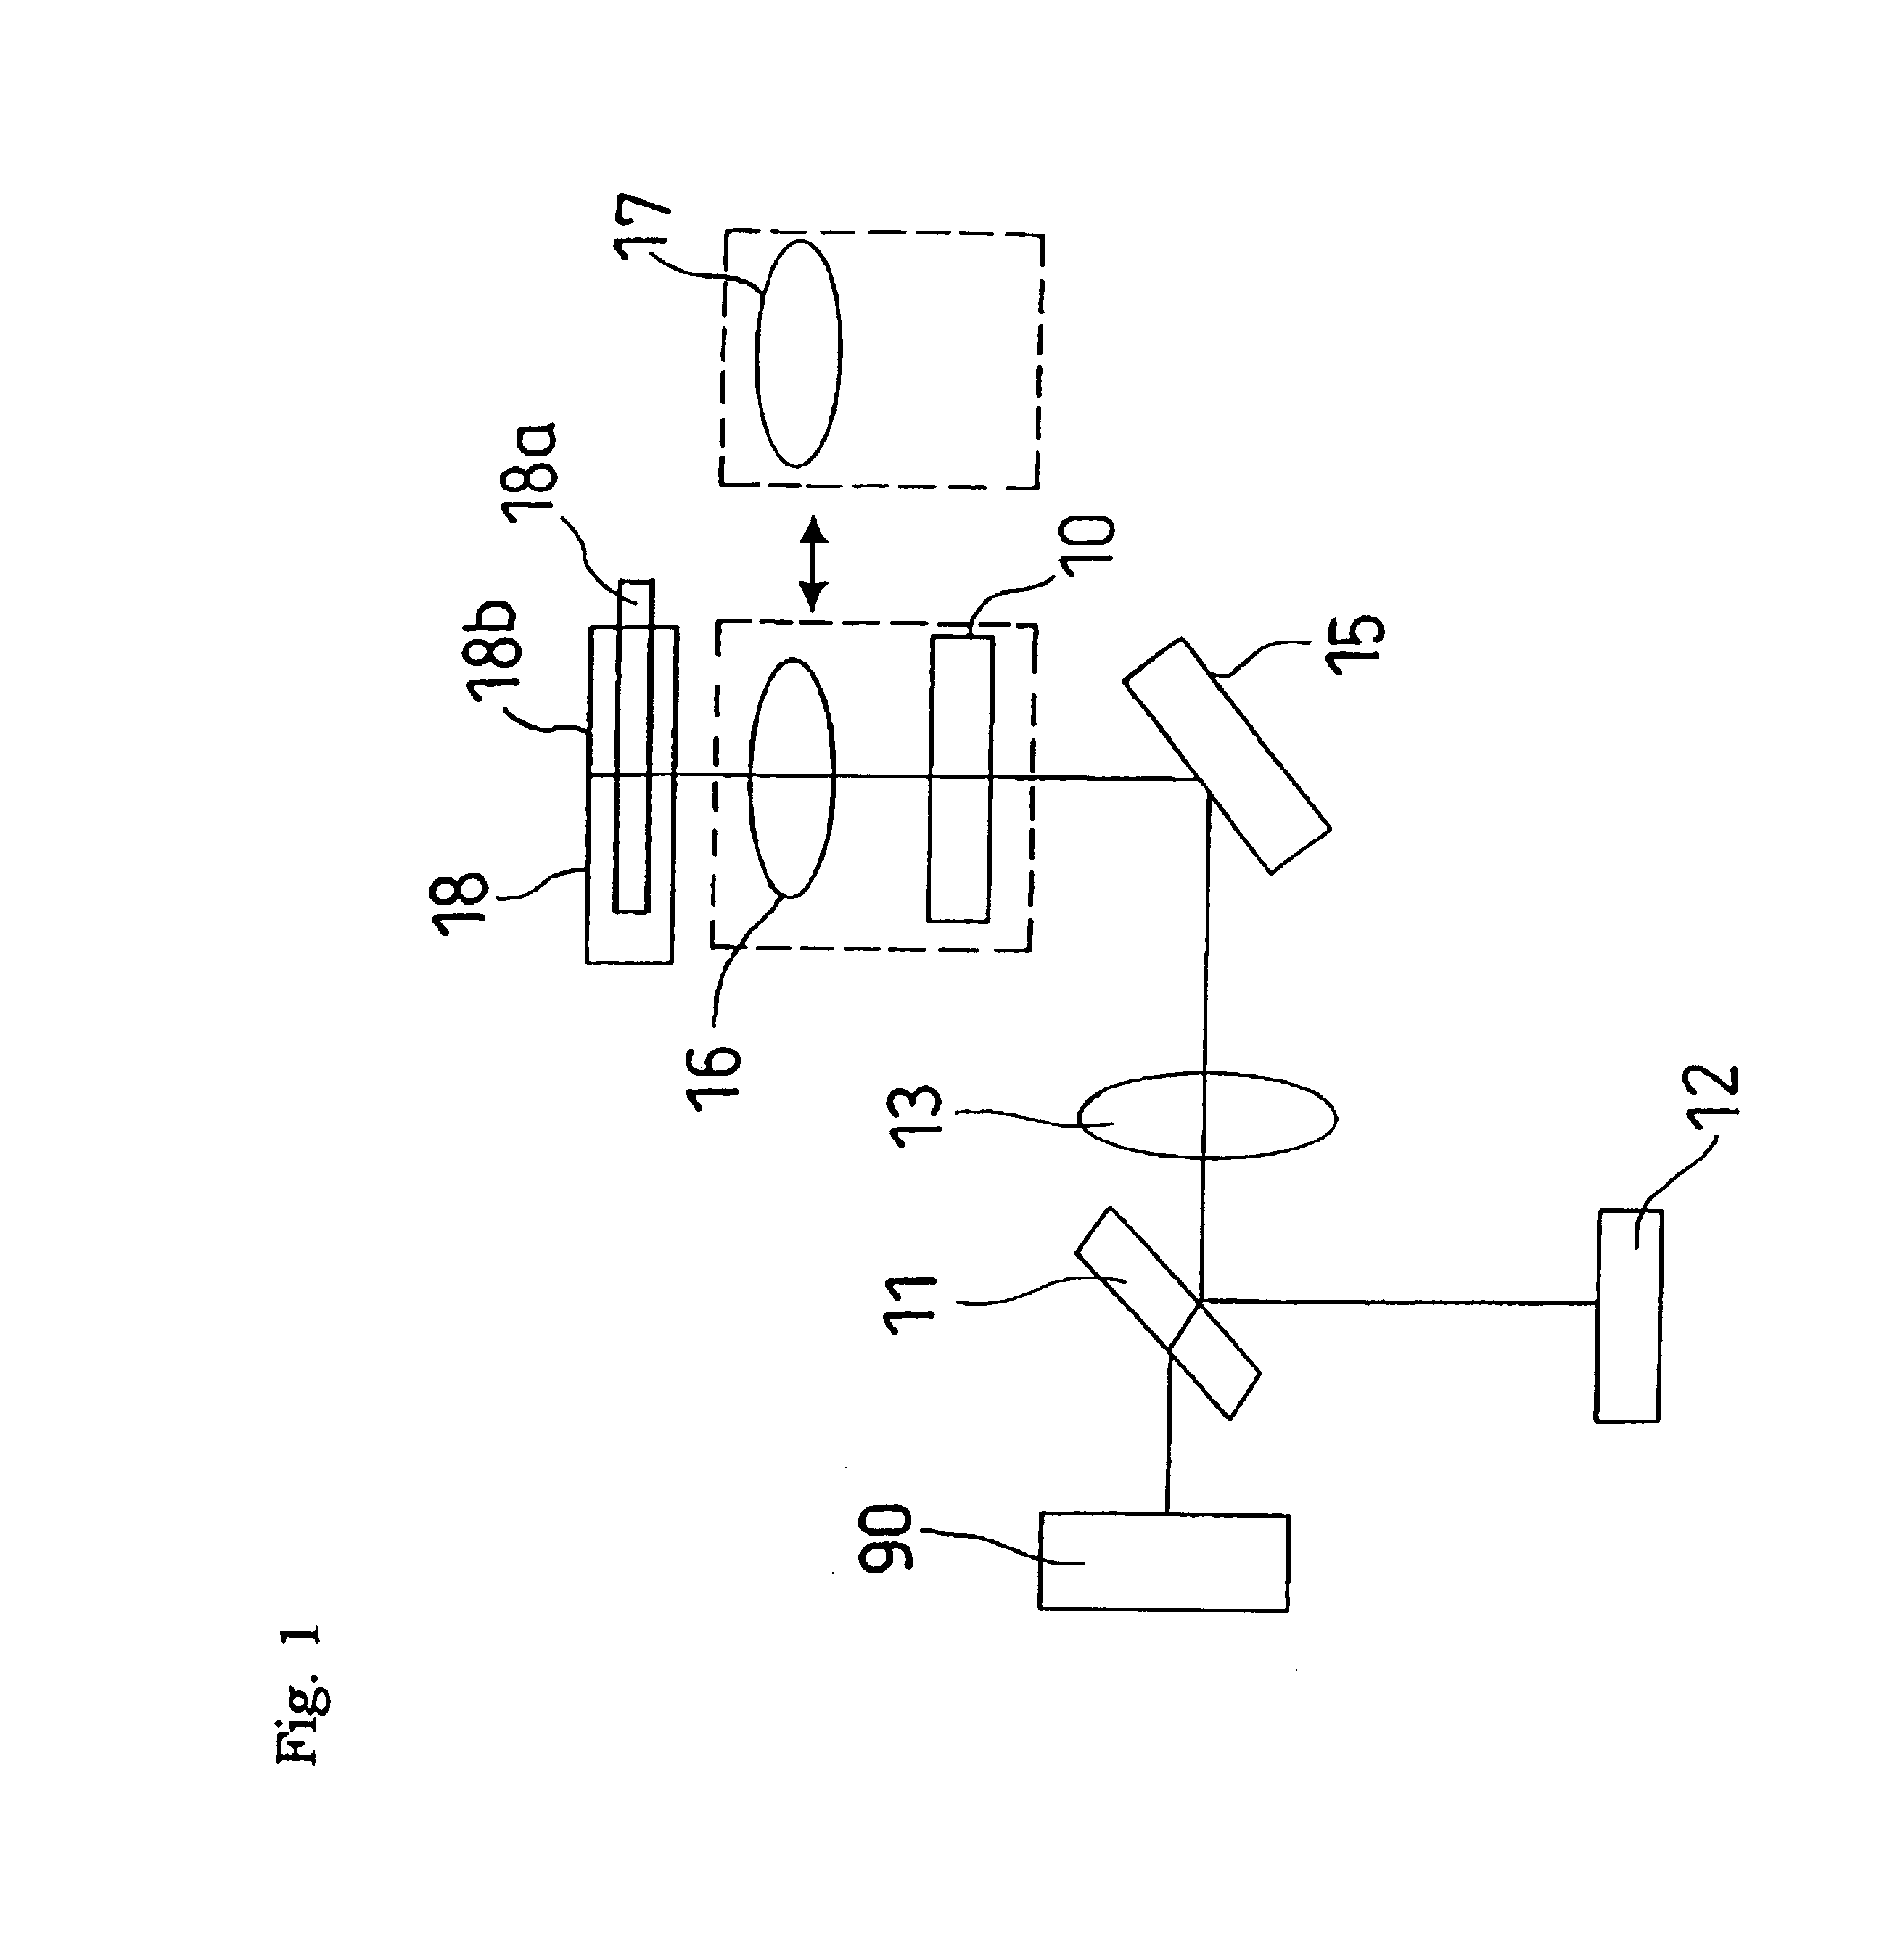 Information reading and recording apparatus